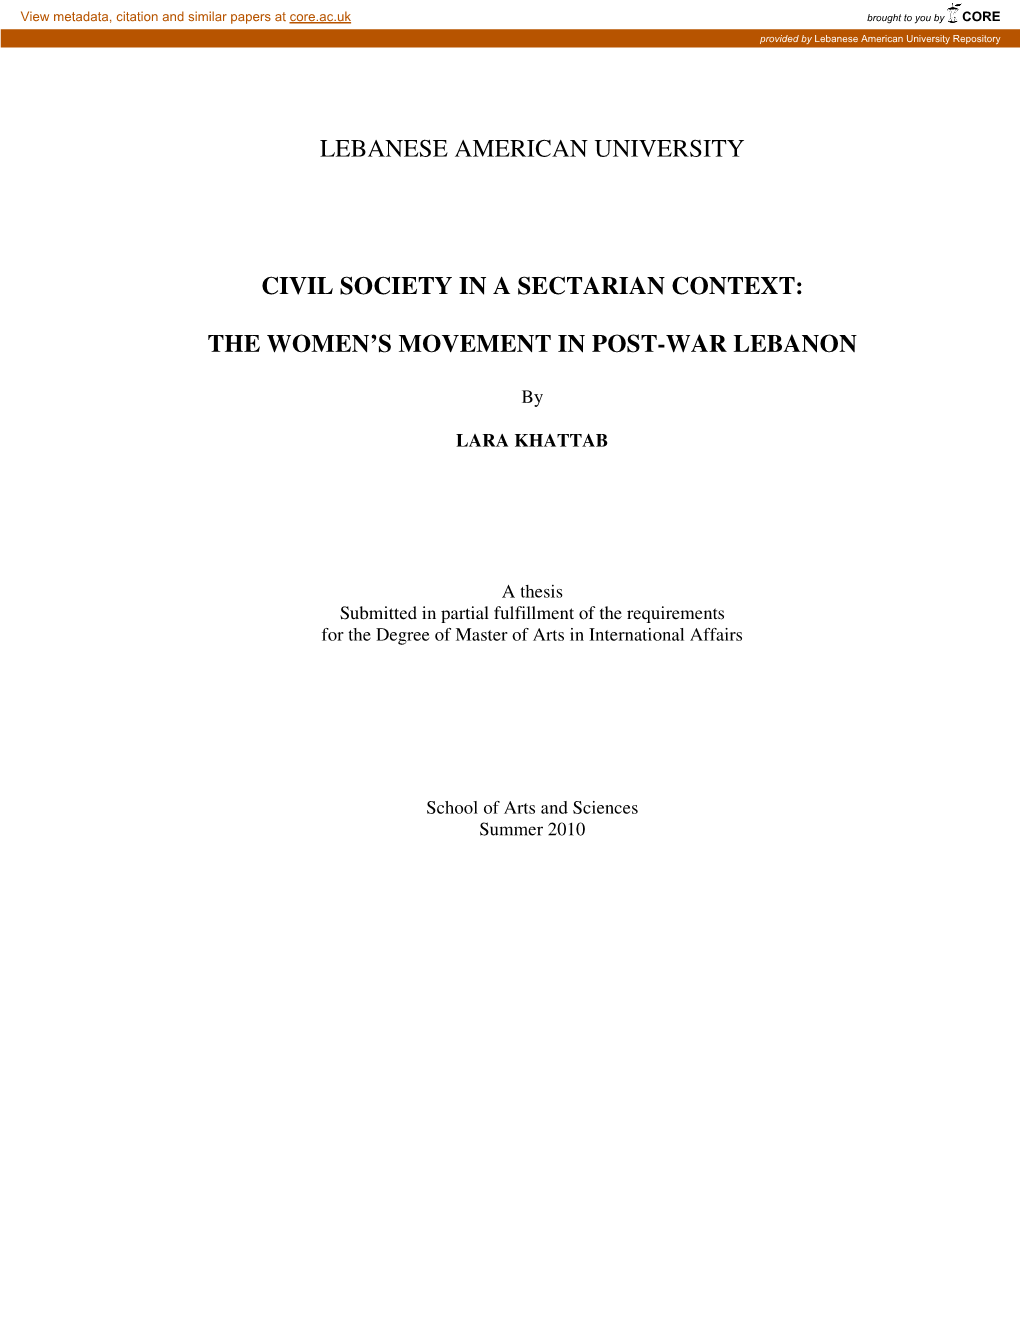 Lebanese American University Civil Society in a Sectarian Context: the Women's Movement in Post-War Lebanon